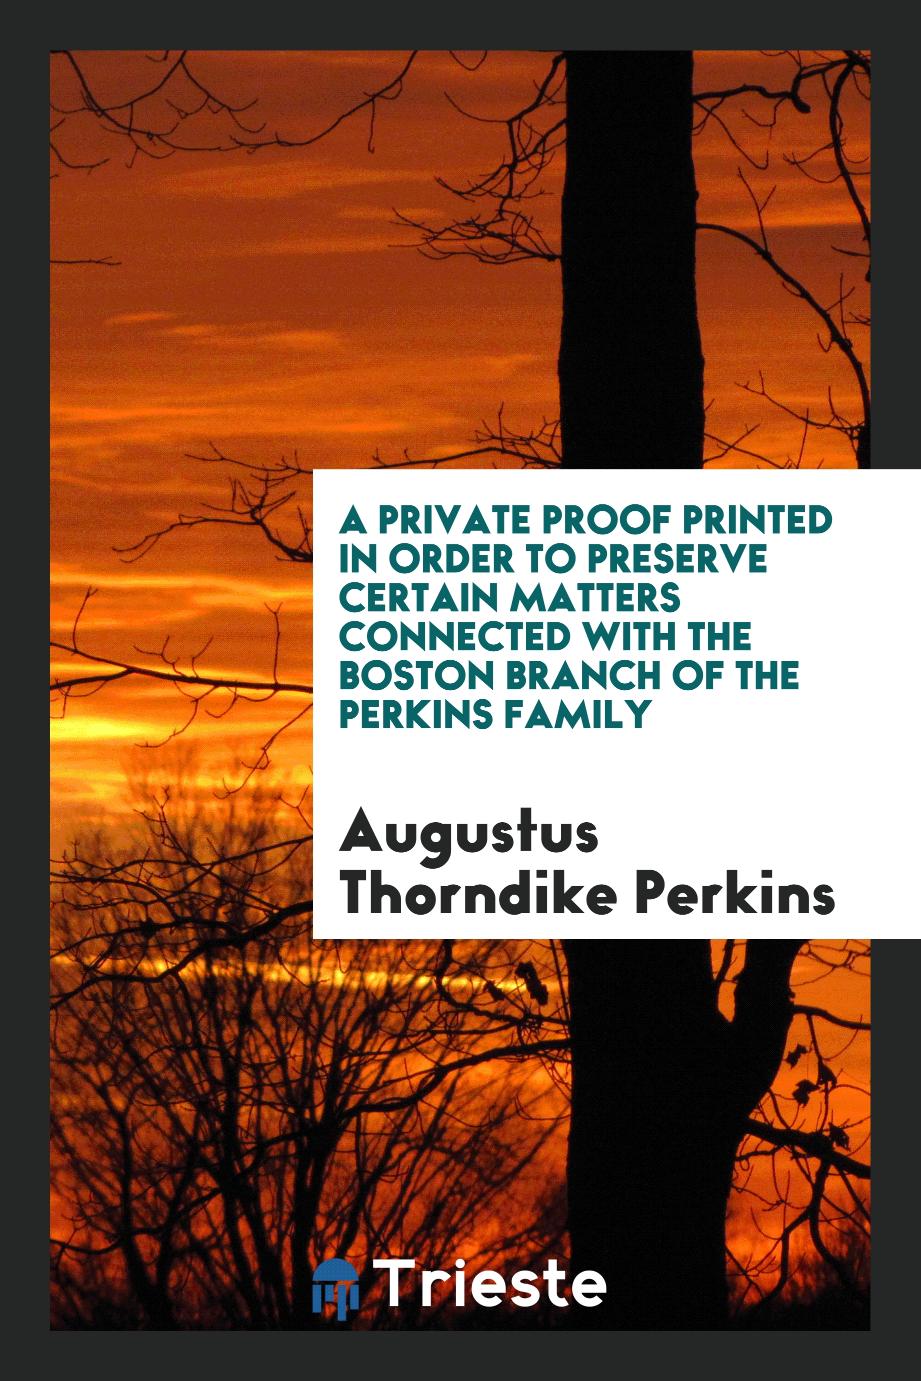 A Private Proof Printed in Order to Preserve Certain Matters Connected with the Boston Branch of the Perkins Family